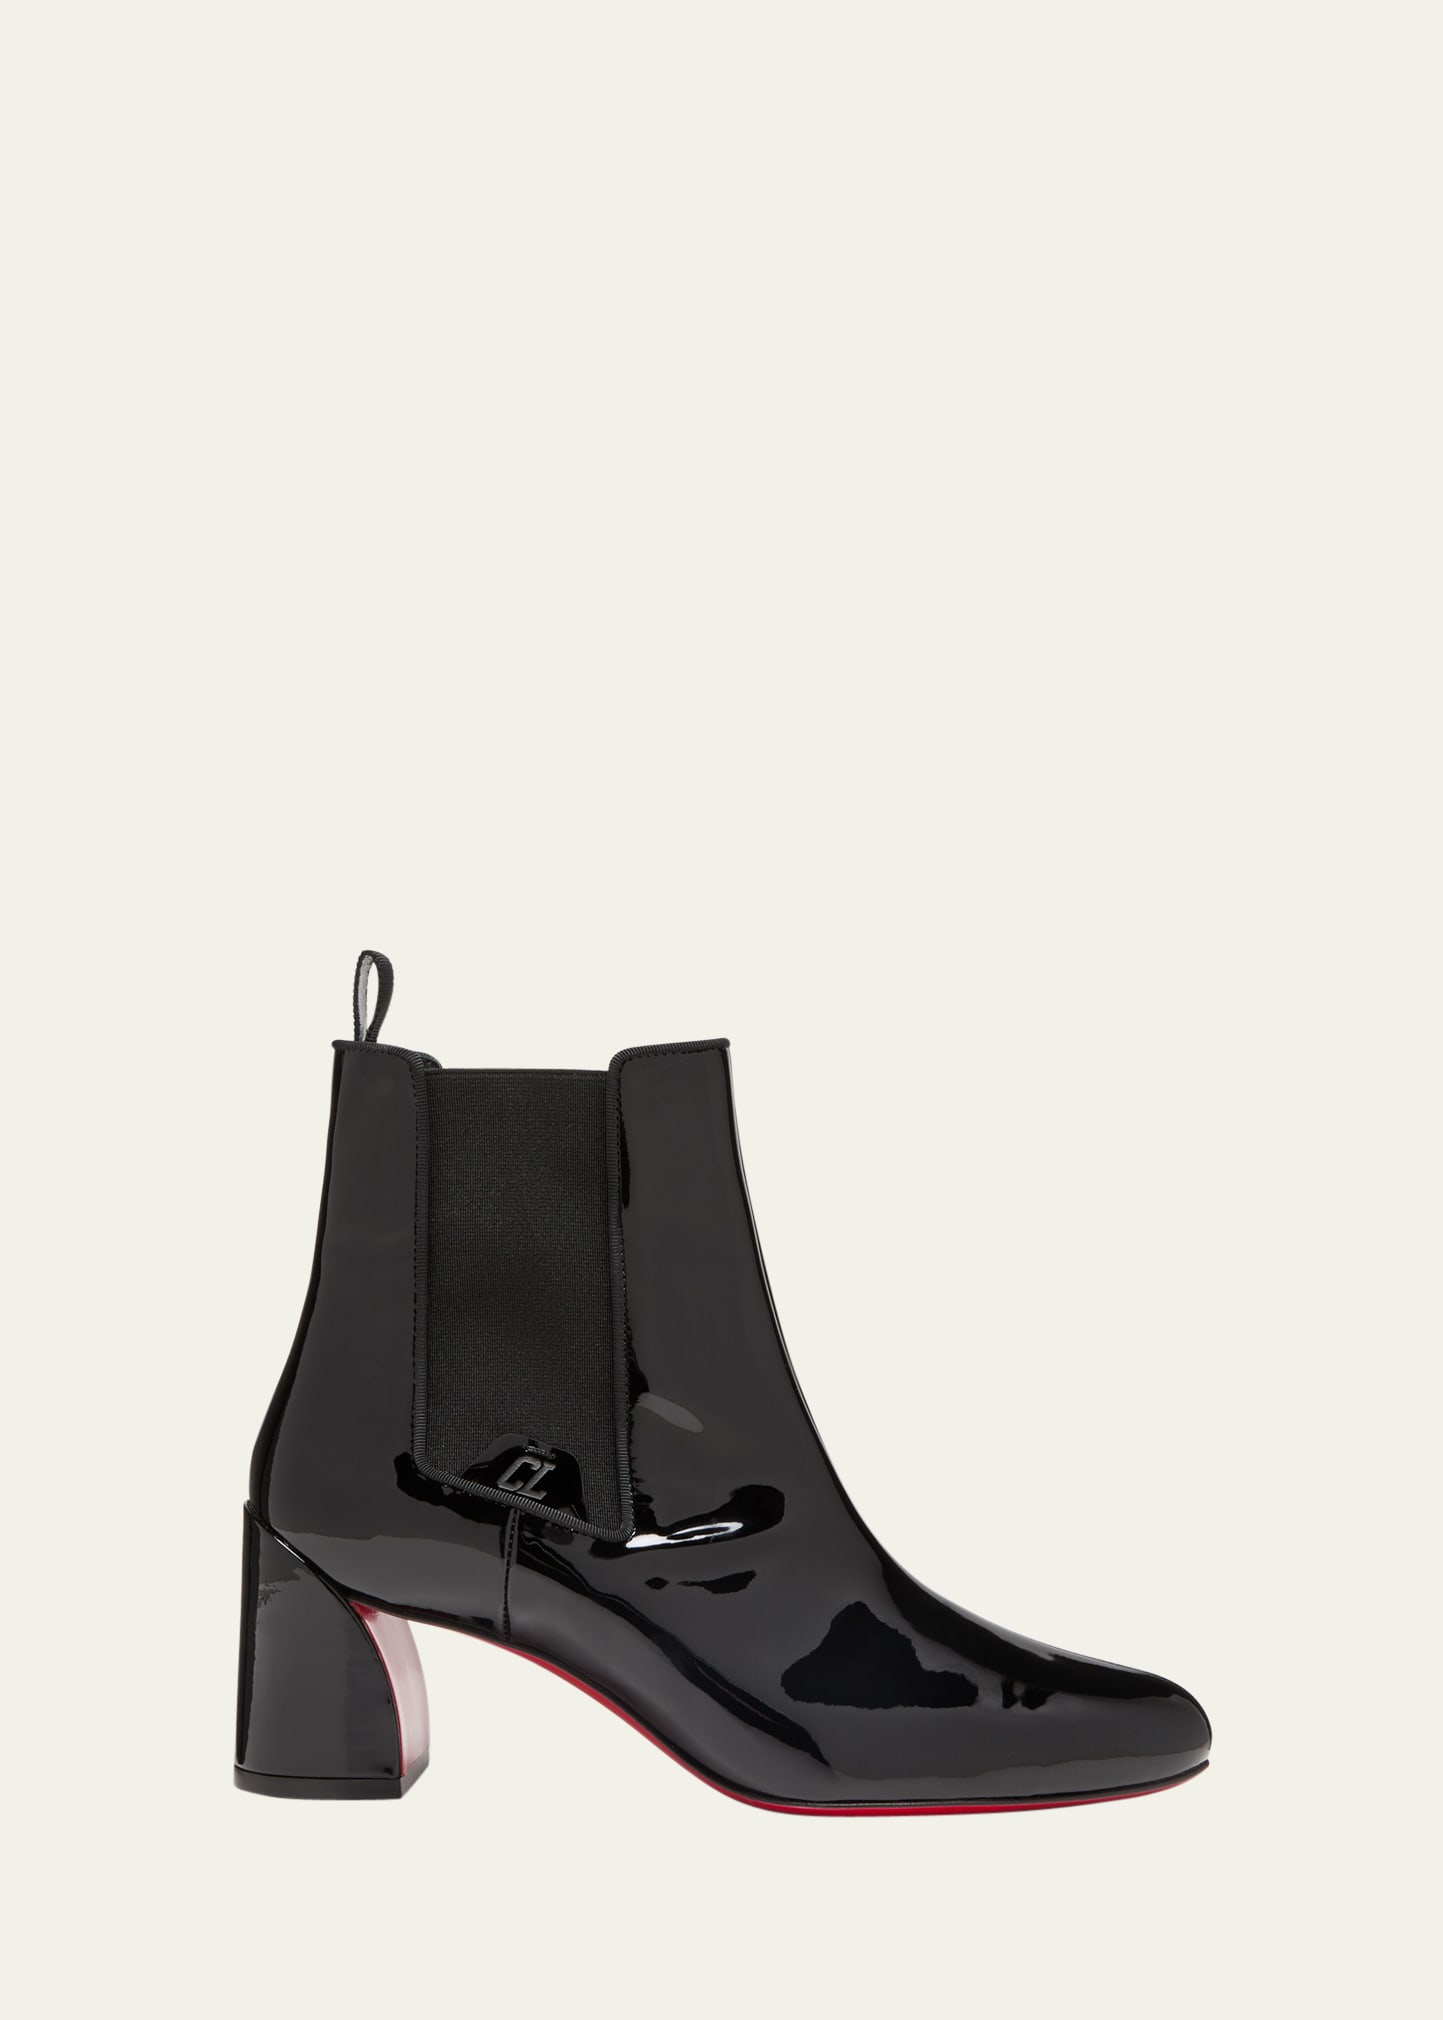 Patent Red Sole Chelsea Ankle Boots